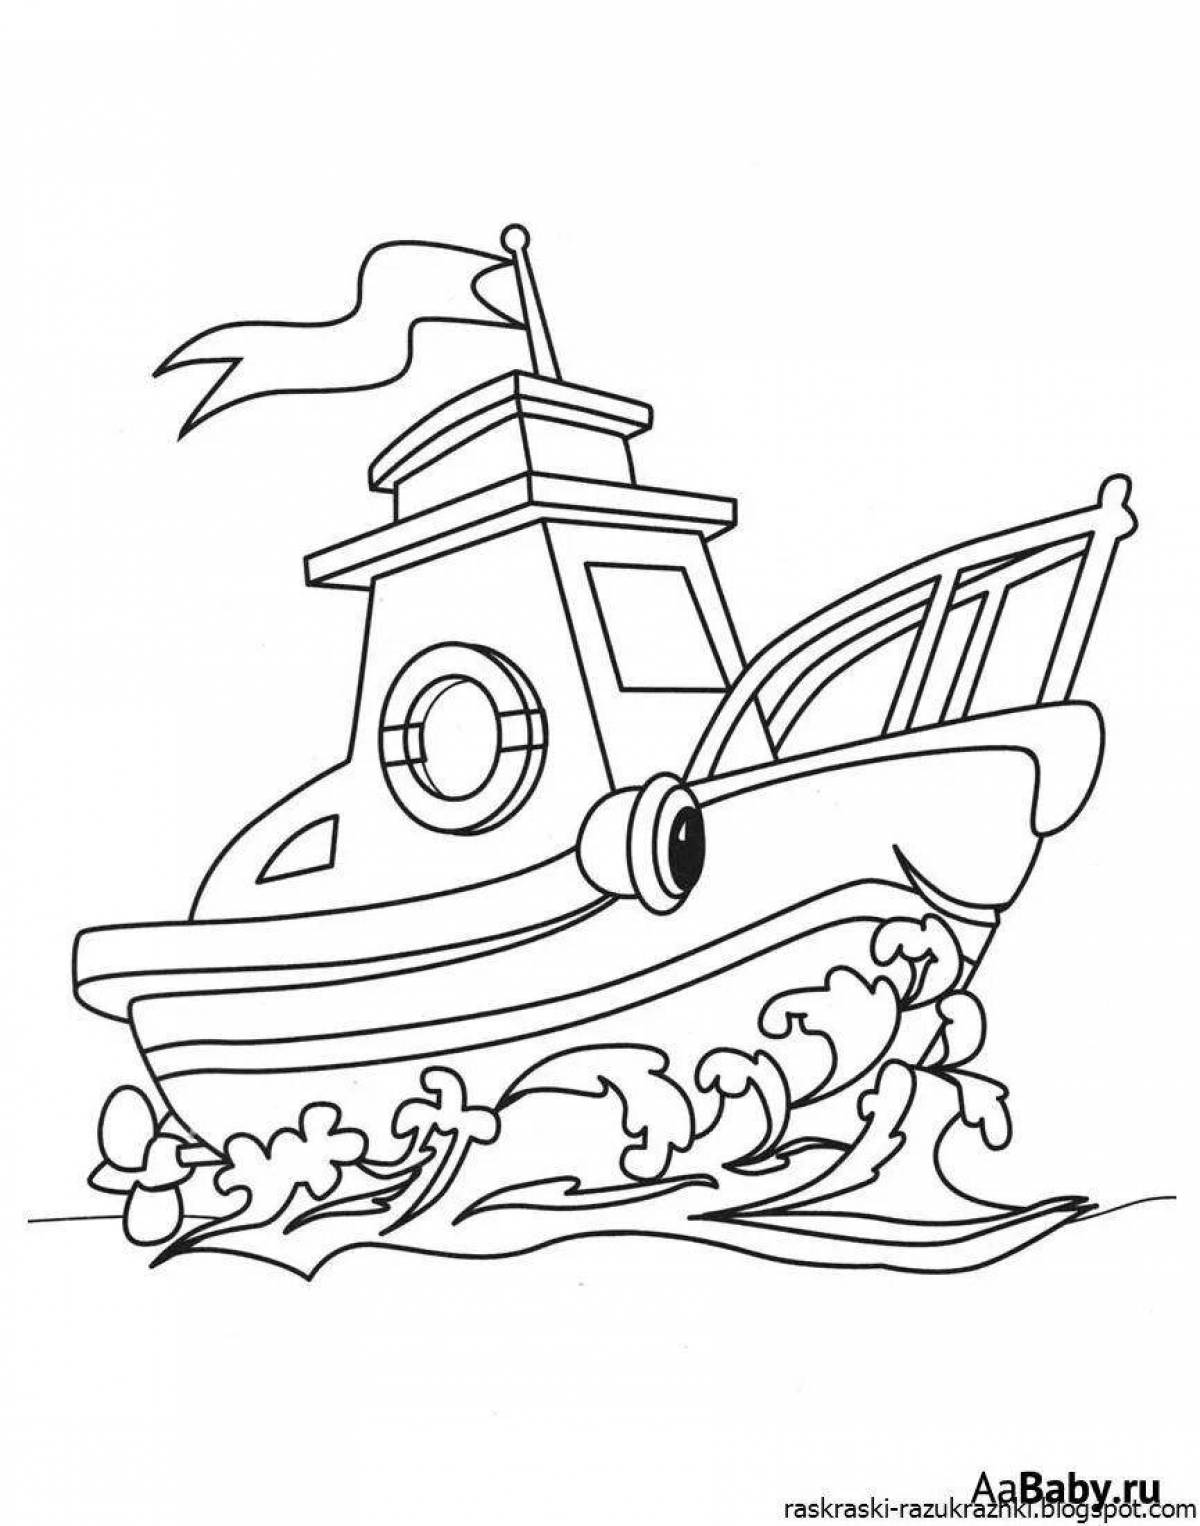 Colorful ships coloring page for 5-6 year olds